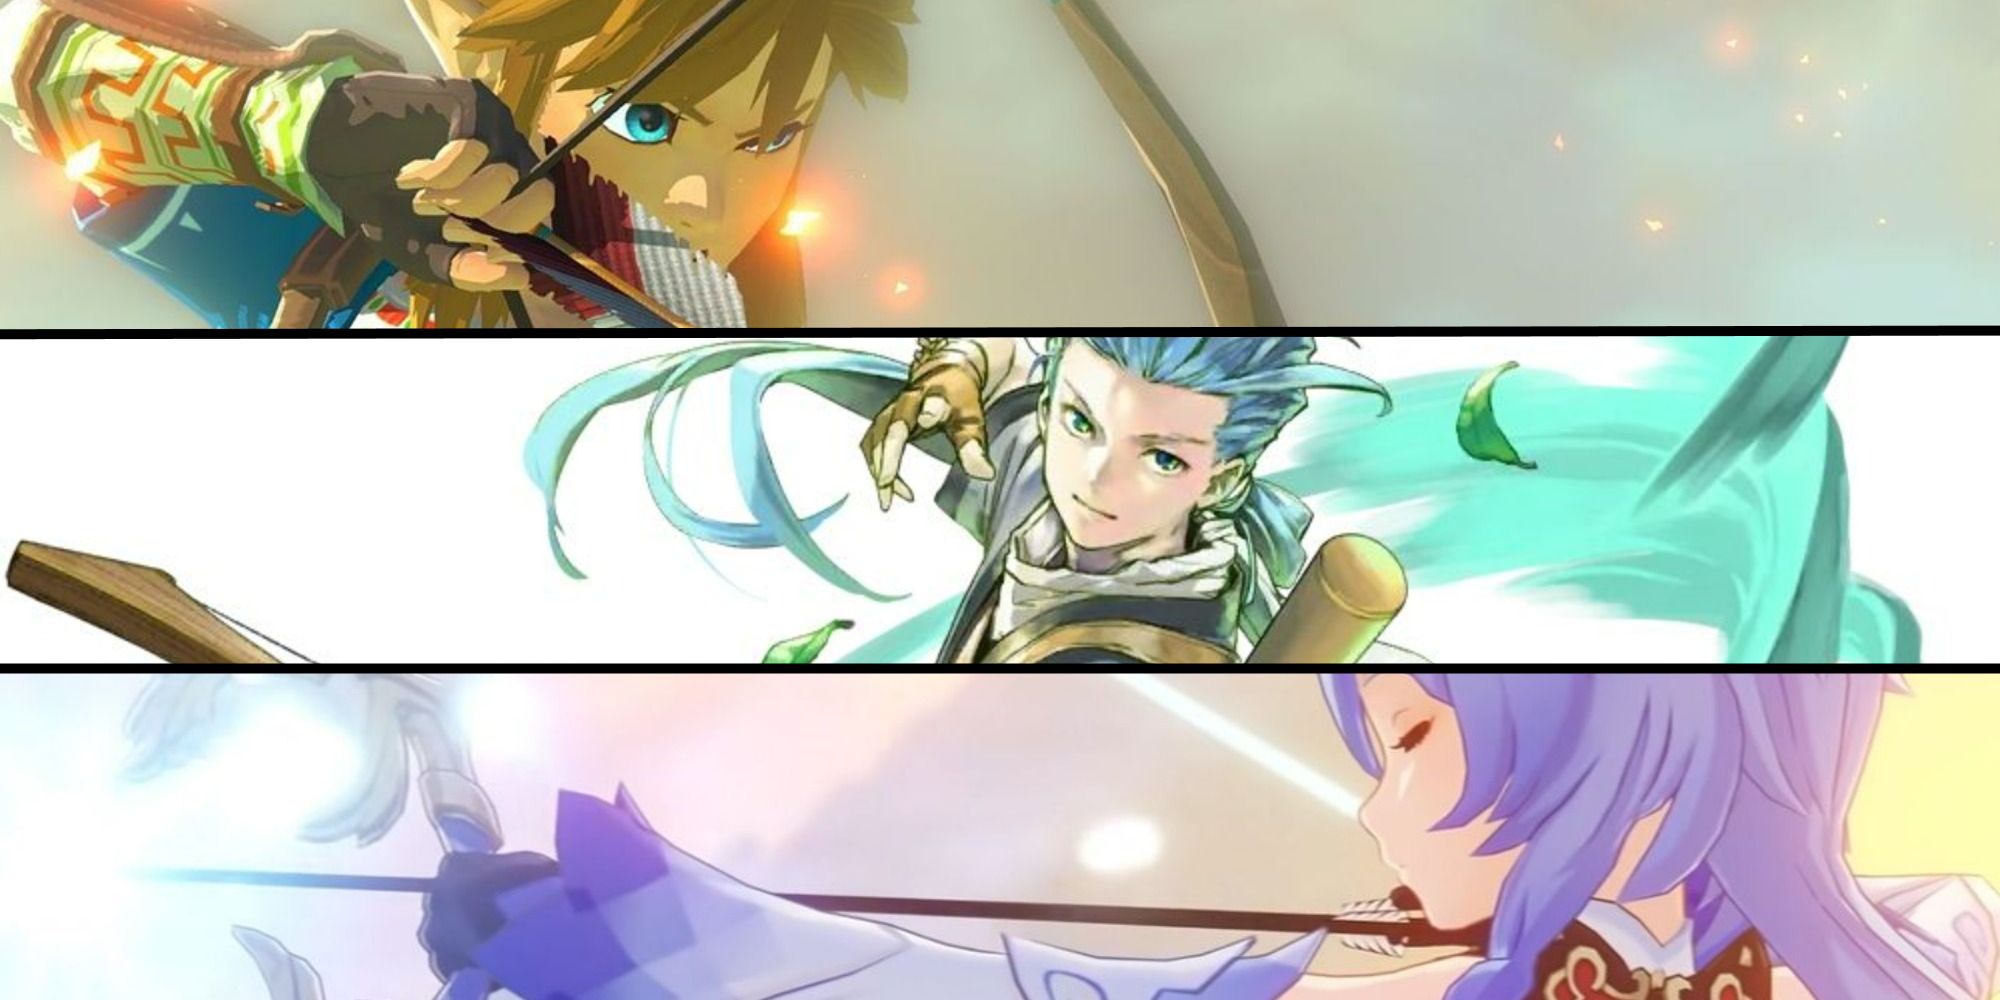 Archers Feature Image featuring Chester From Tales Of Phantasia, Ganyu from Genshin Impact, and Link from Breath of the Wild